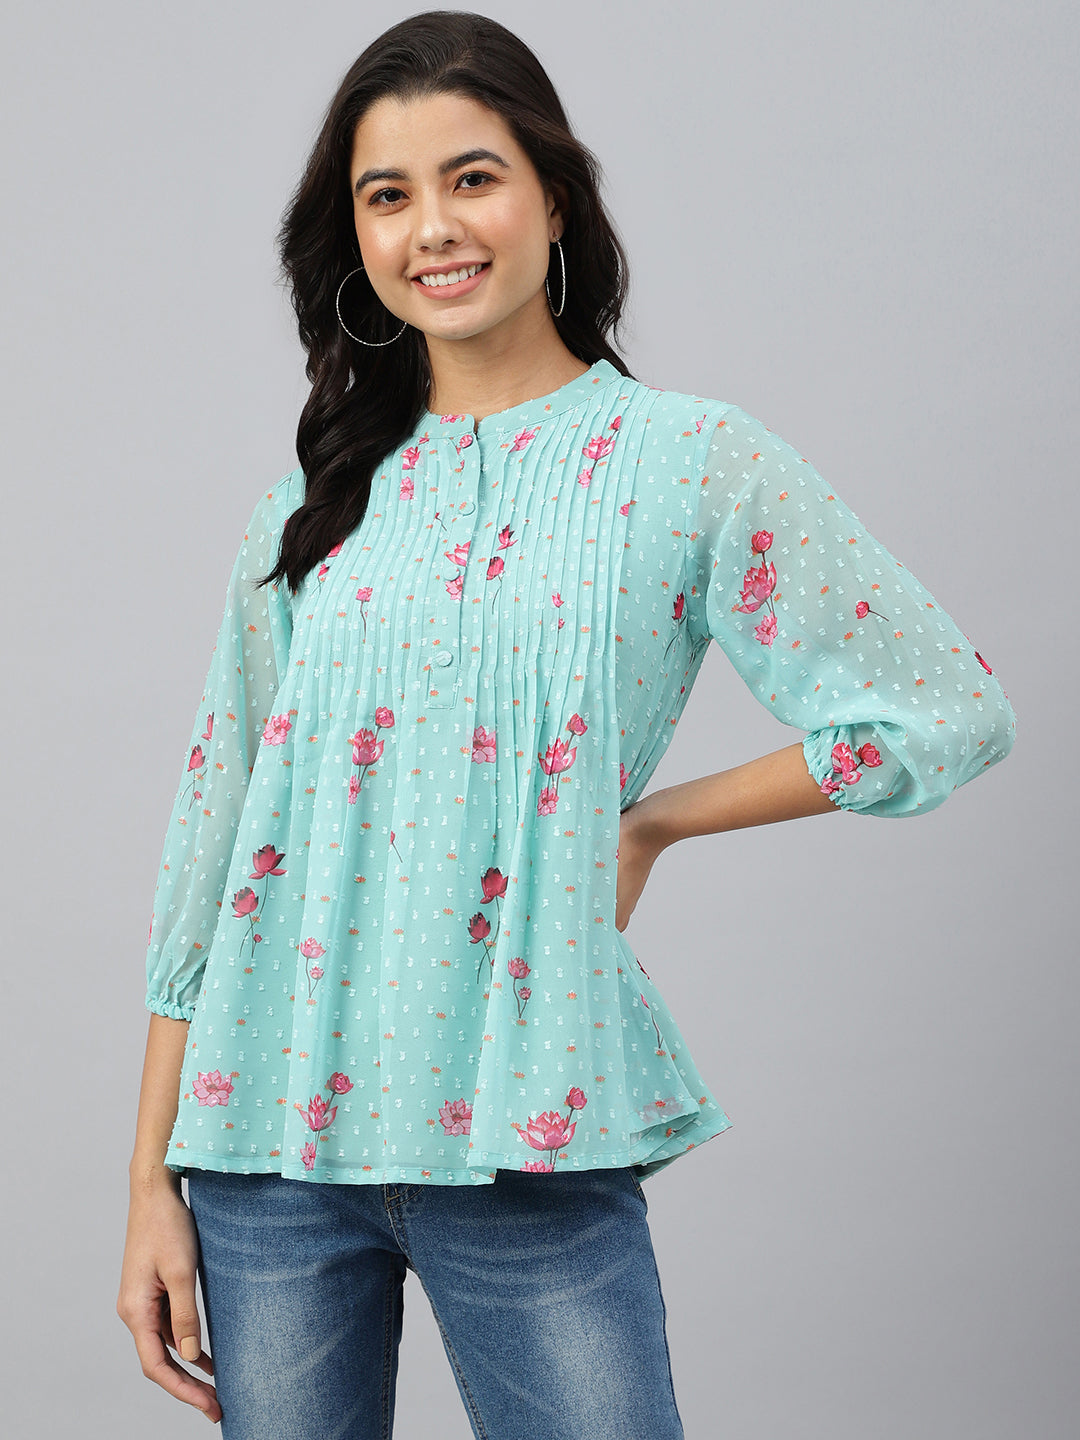 Women's Floral Print Sea Green Dobby Georgette Tops - Final Clearance Sale